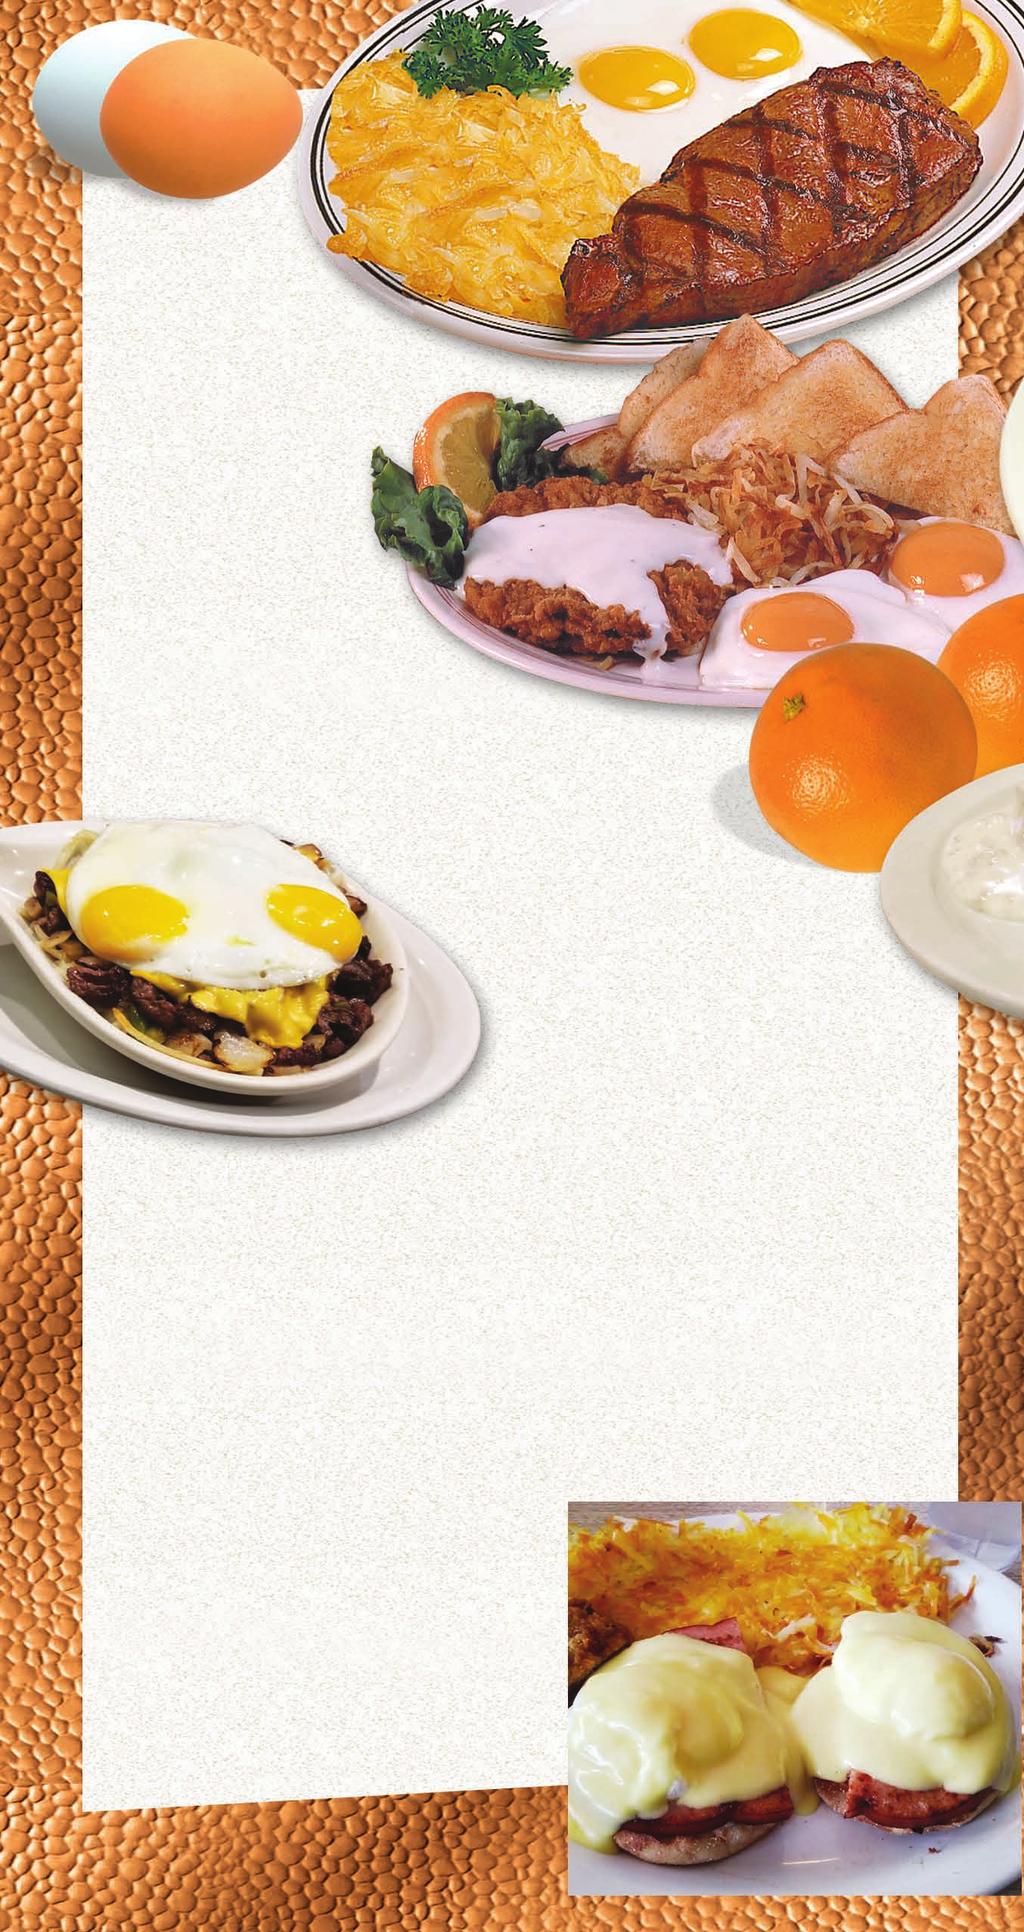 STRIP STEAK & EGGS MEAT LOVER S FAVORITES Served with two country fresh eggs, any style, hash browns or fresh fruit, toast and jelly Add an extra egg for only 1.25 Make it Egg Whites - add 1.